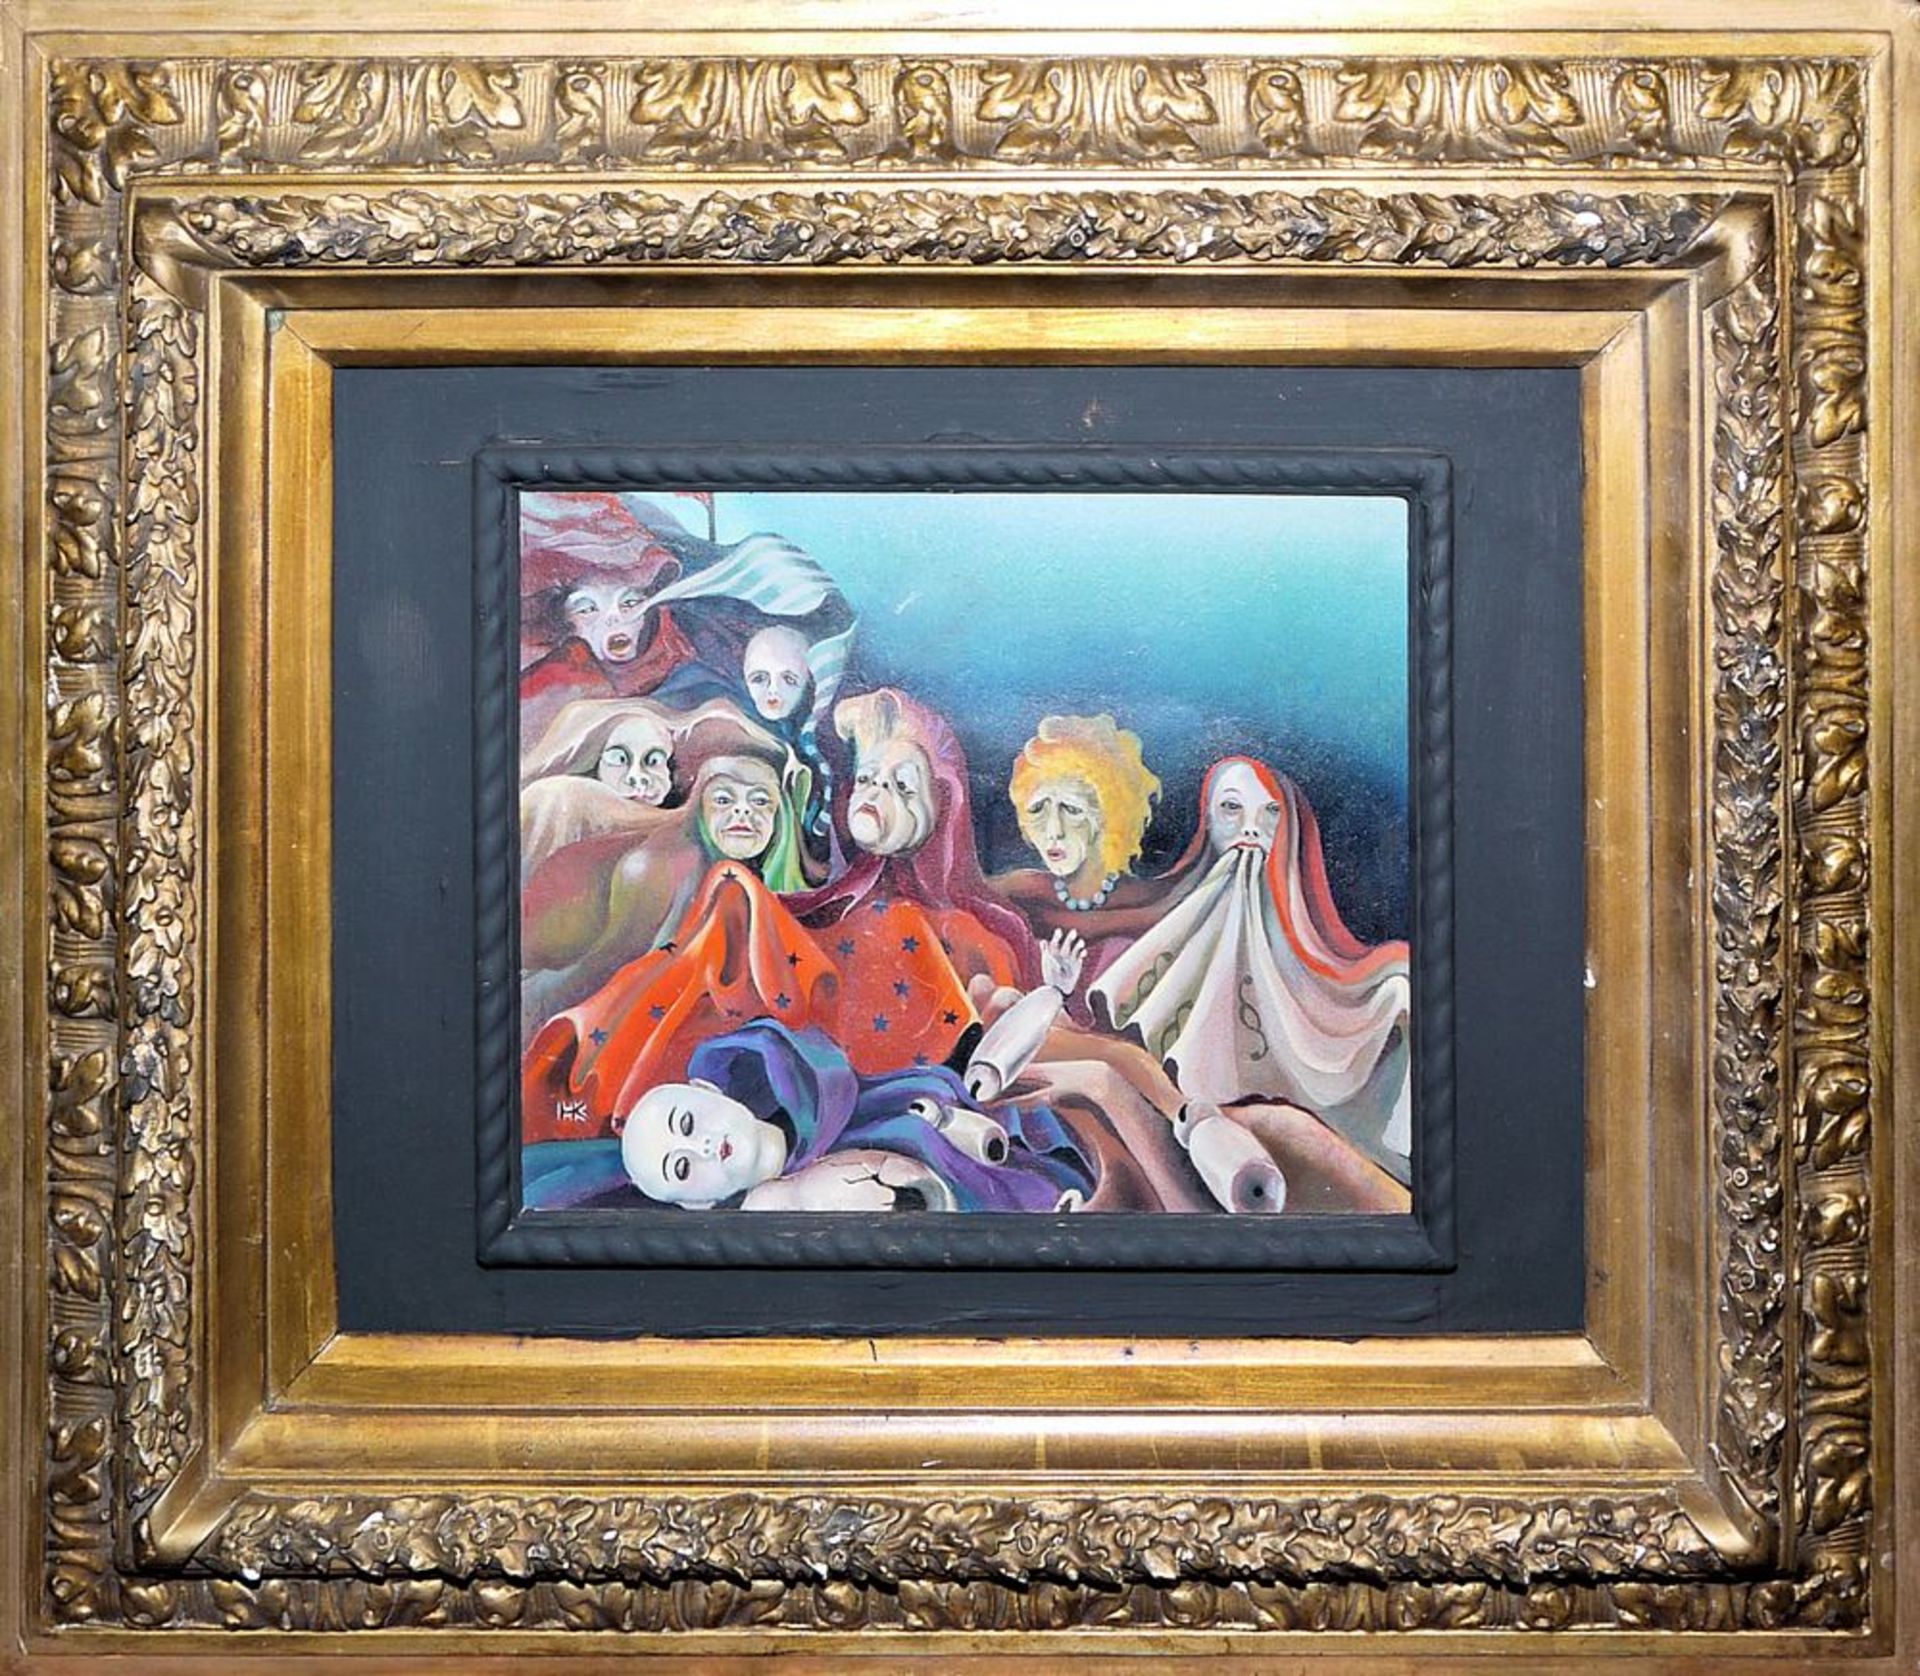 Monogramist HK from 1978, "Emanzen", oil painting in a splendid stucco frame of the 19th century